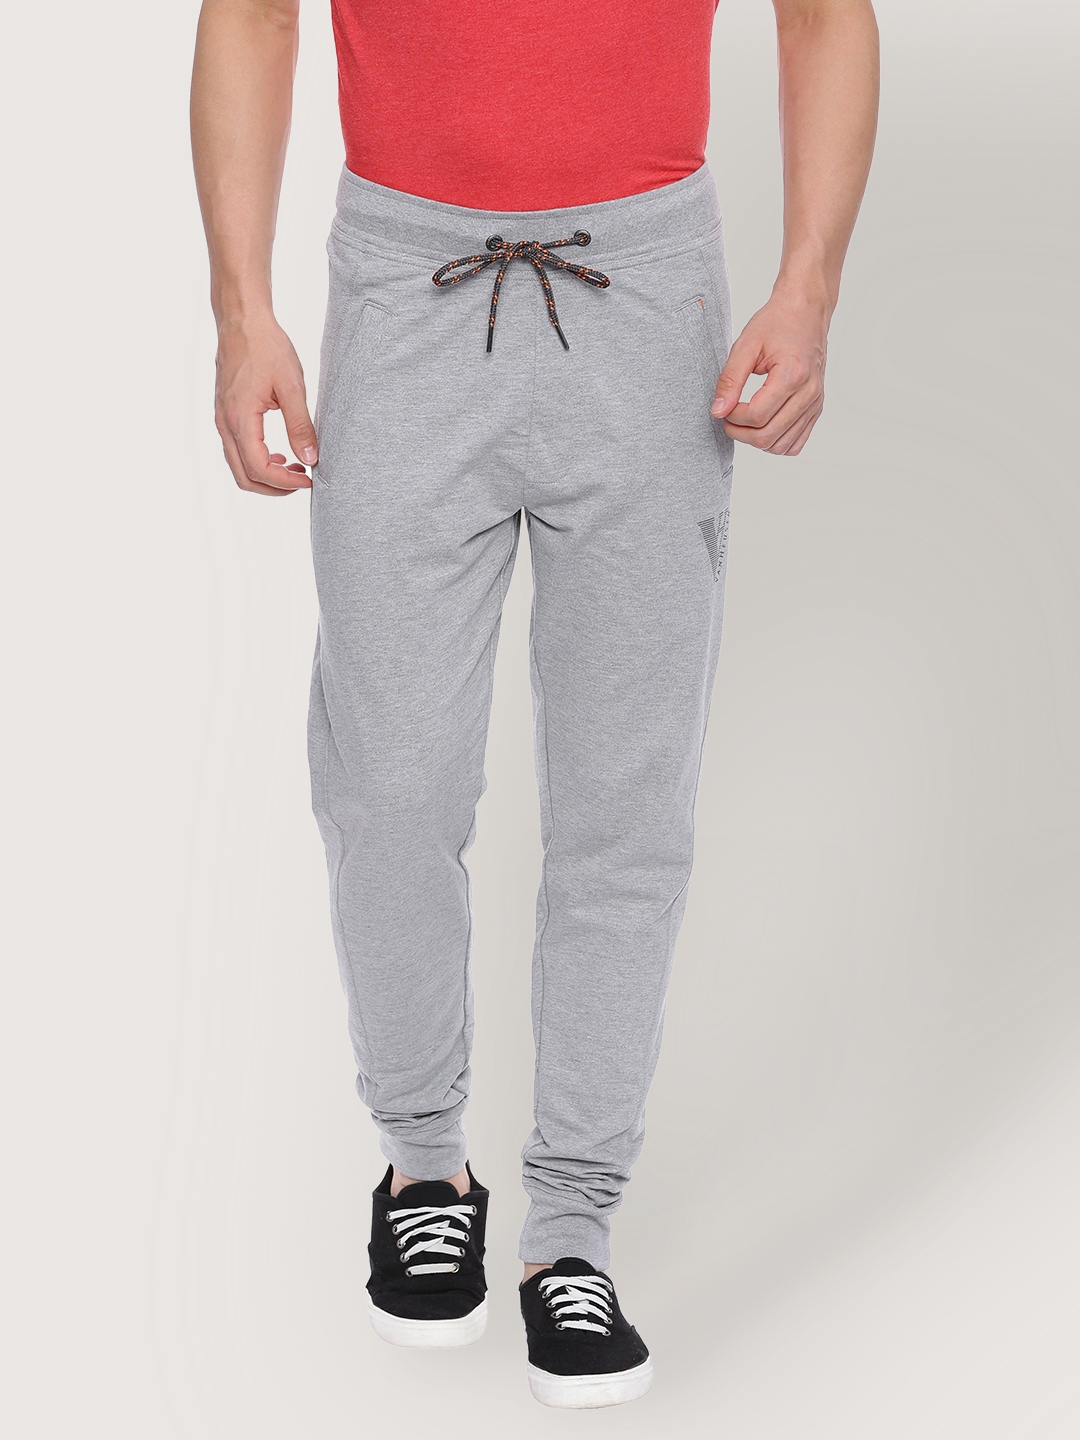 Buy Grey Track Pants for Men by ALTHEORY SPORT Online  Ajiocom